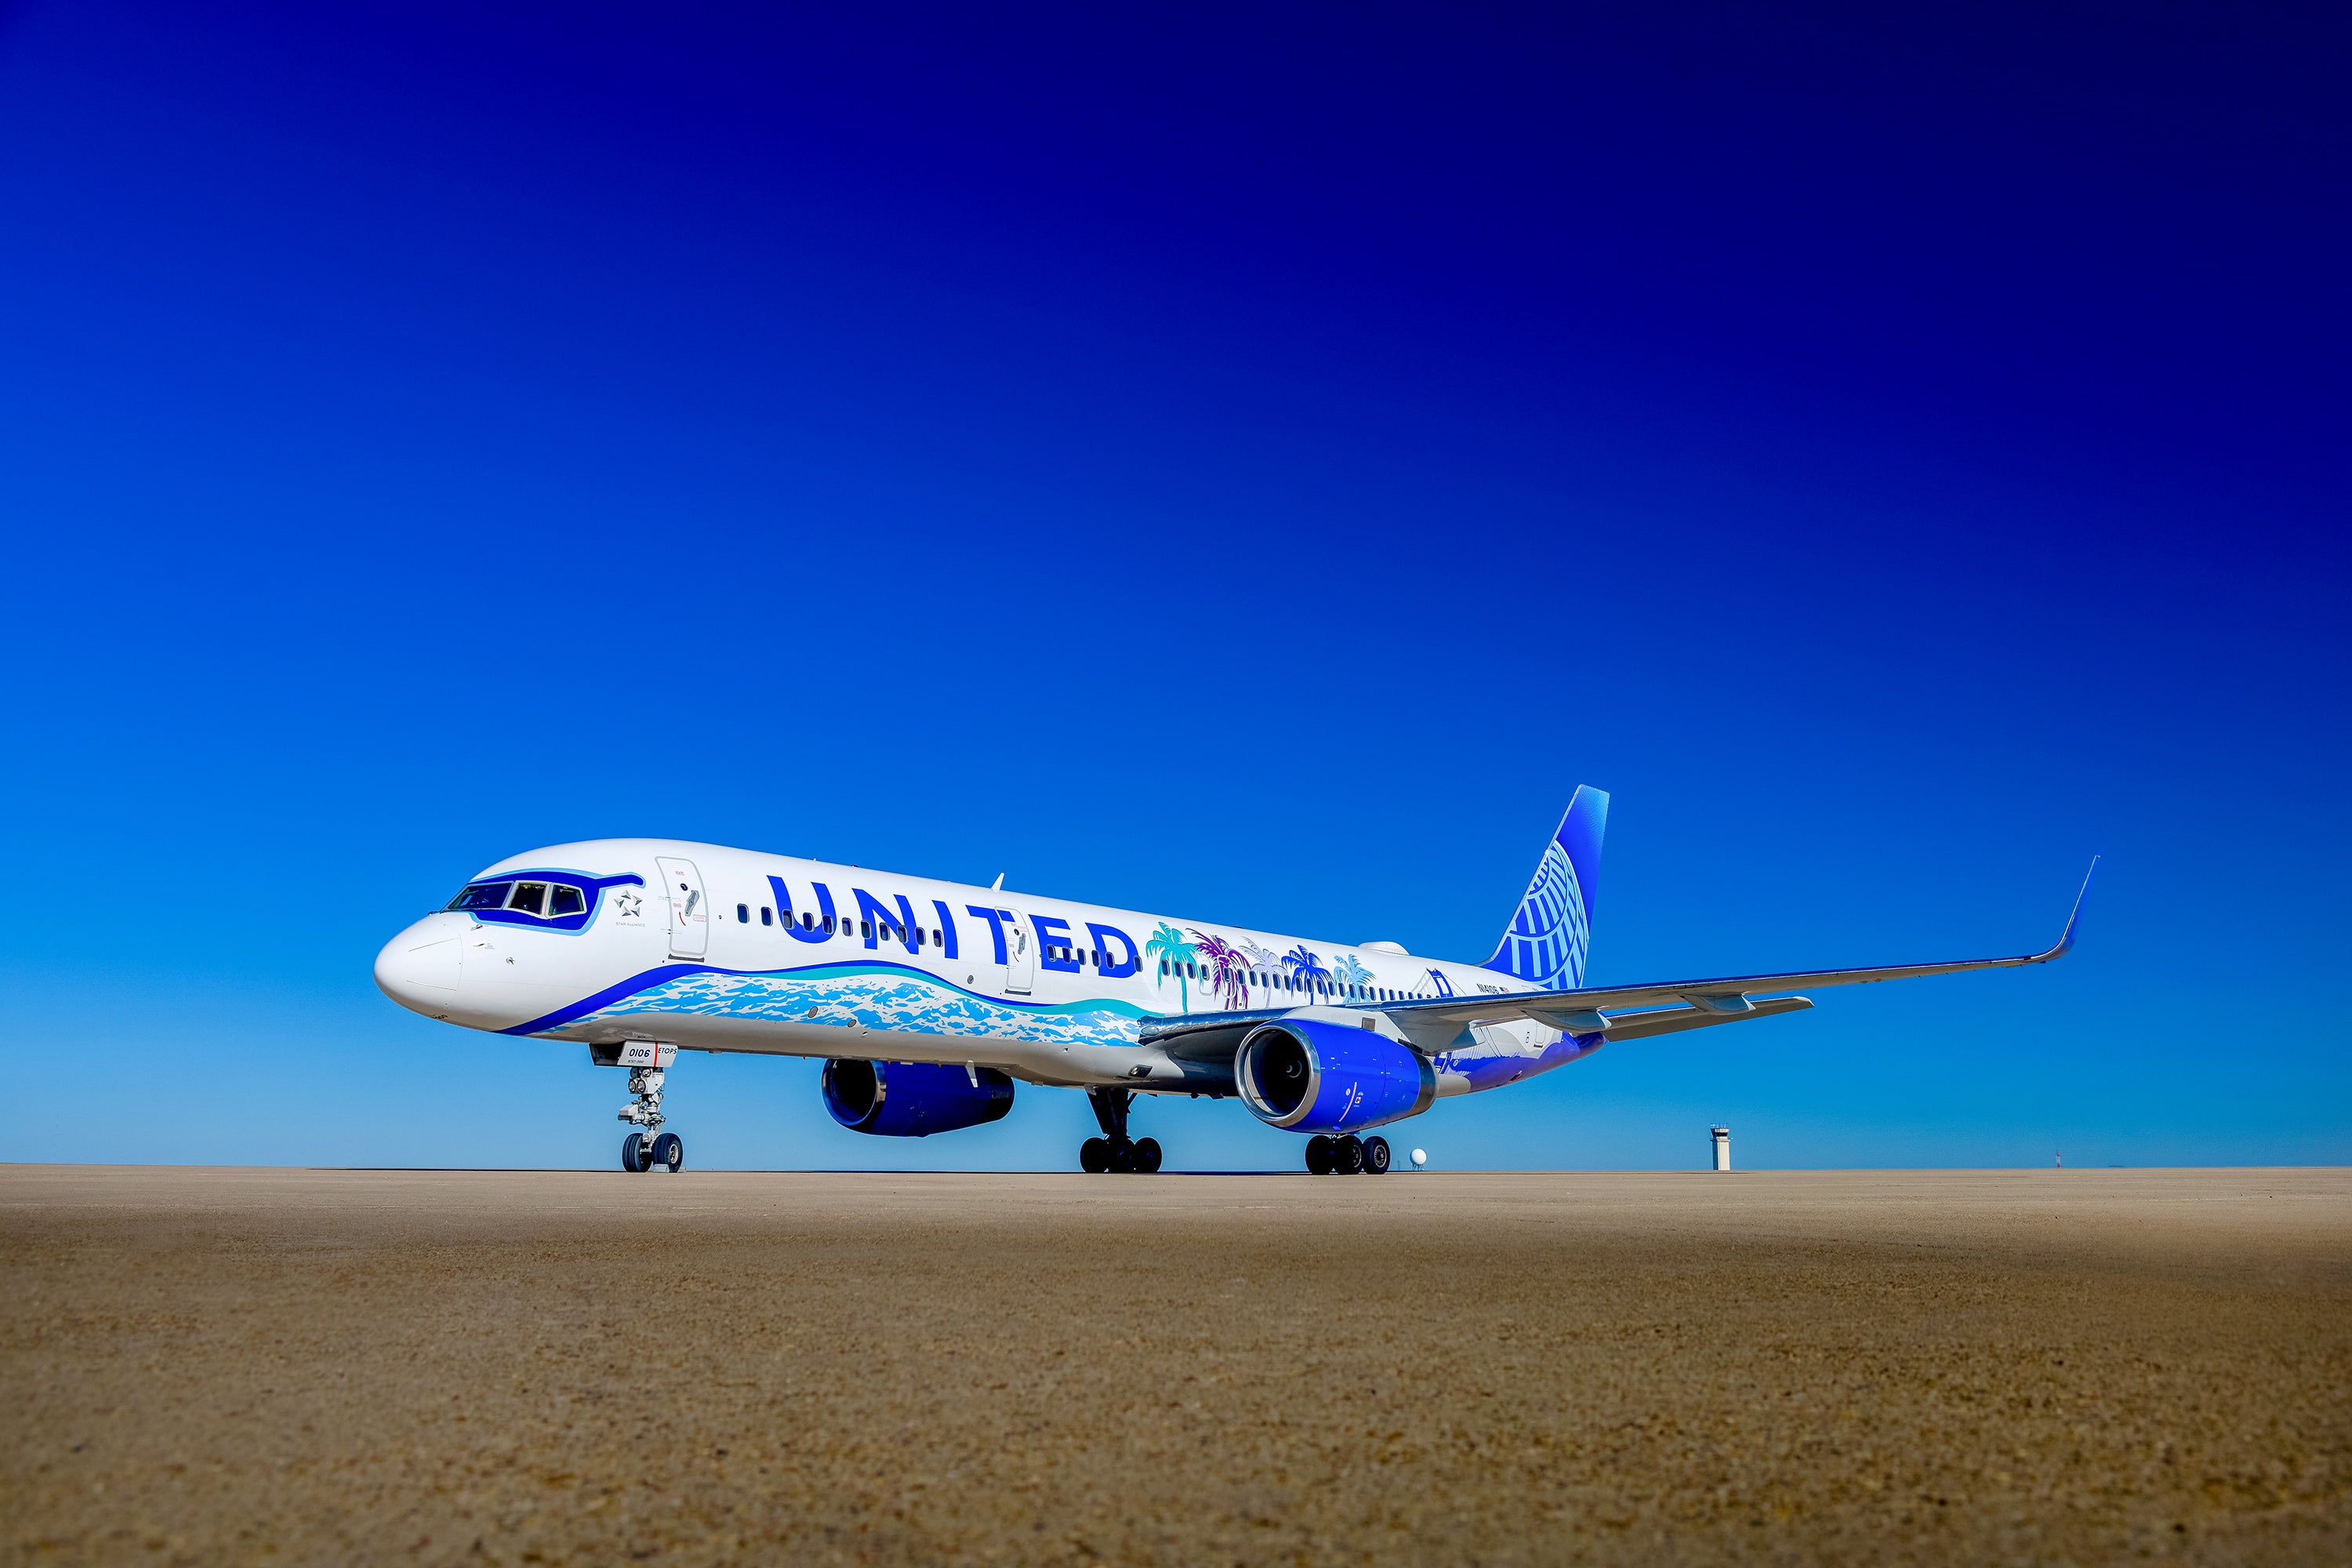 United Airlines Her Art Here California Livery - Full View